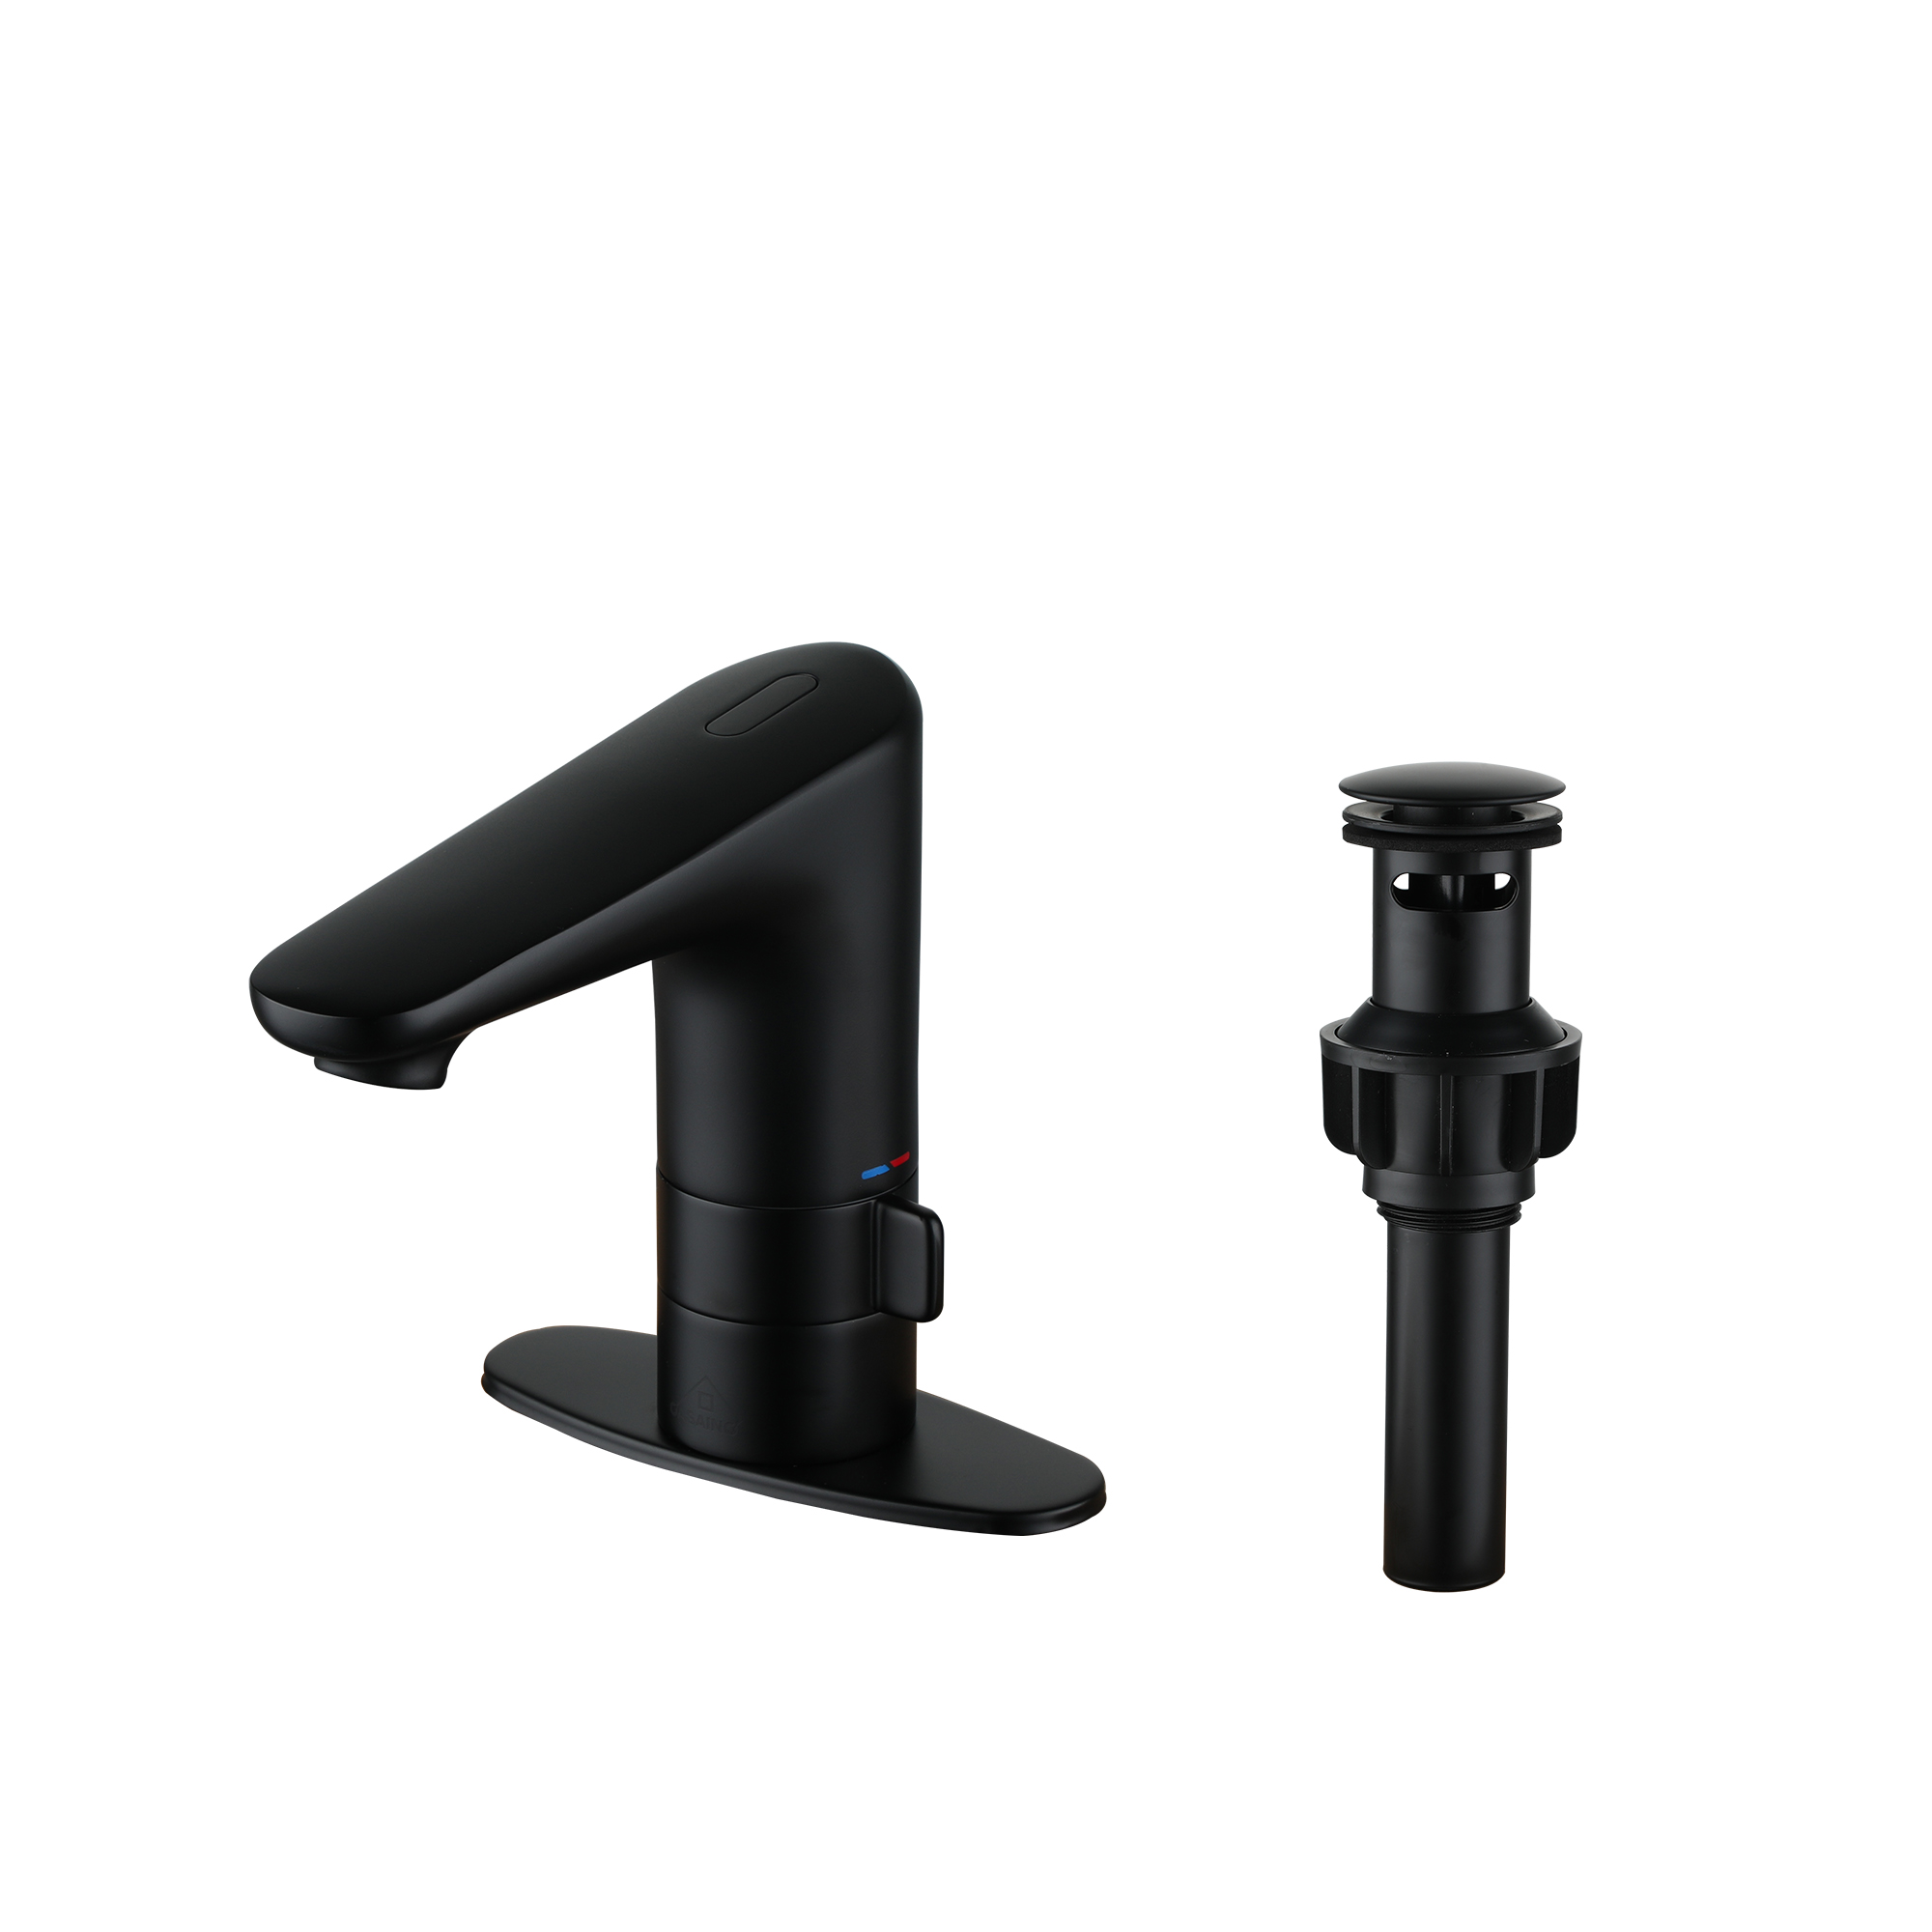 Infrared Sensor Faucet Single Handle Bathroom Basin Faucet with Drainer and Deckplate